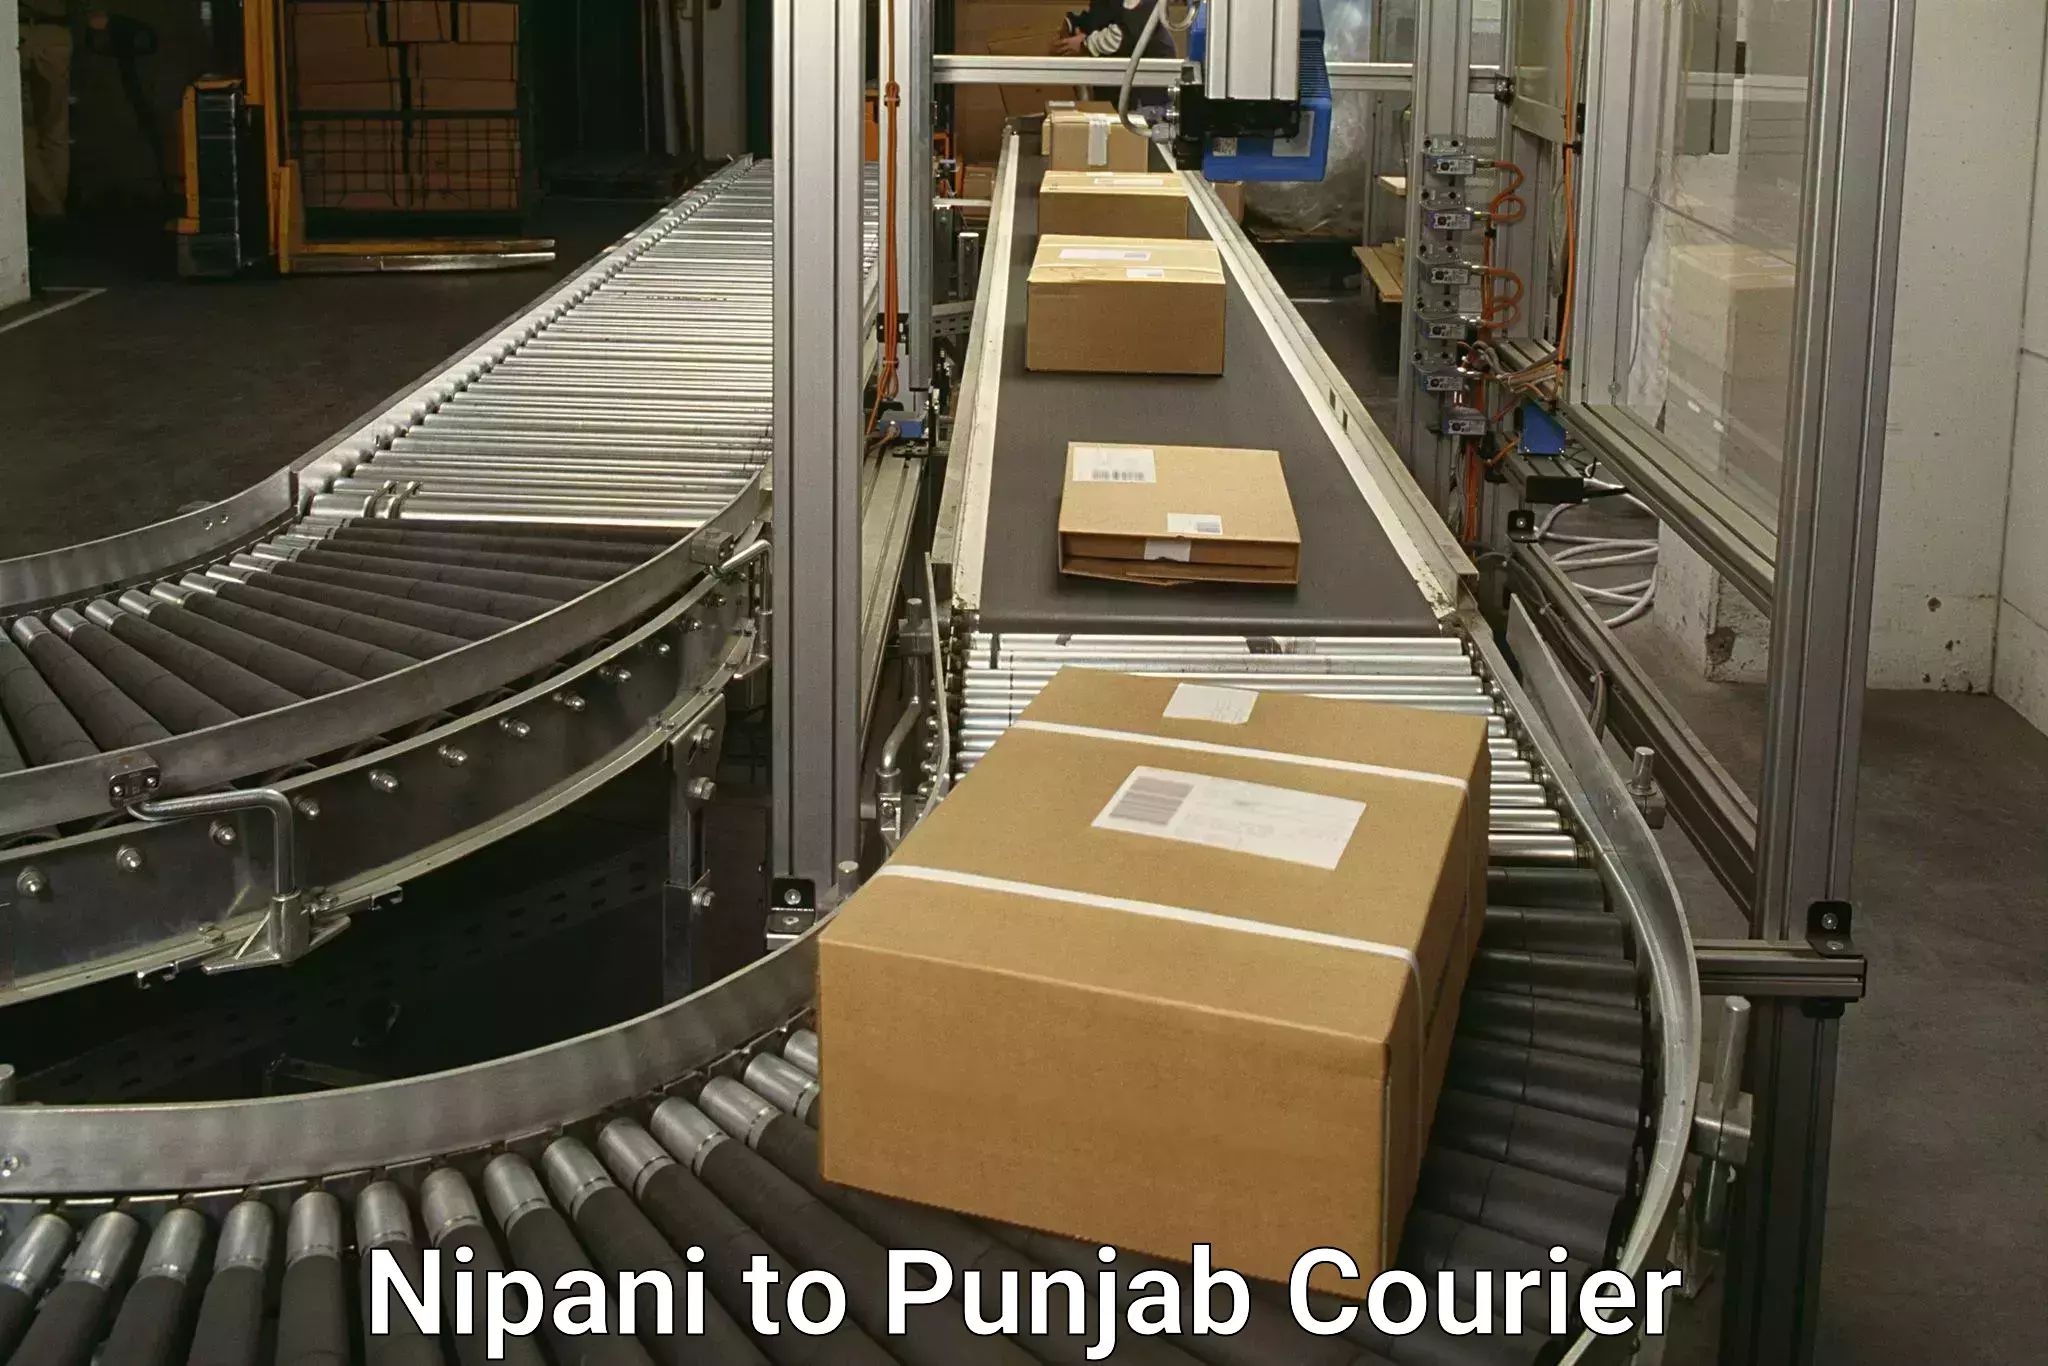 Same-day delivery solutions Nipani to Faridkot